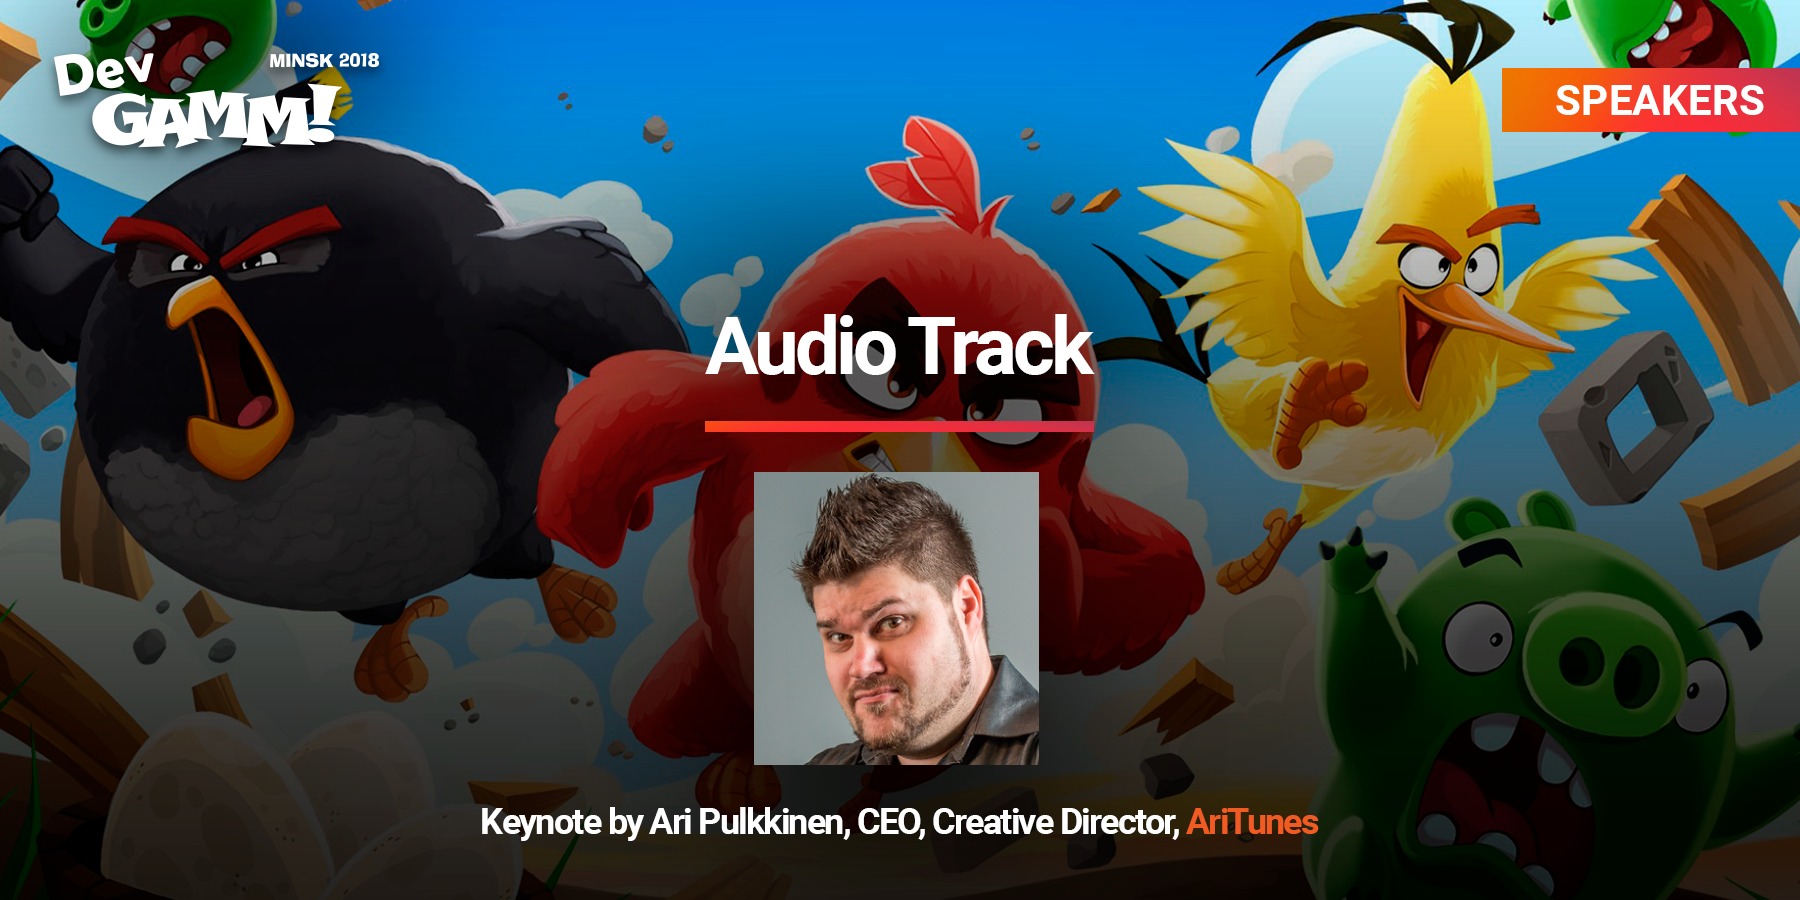 You are currently viewing Angry Birds composer’s keynote at Audio Track